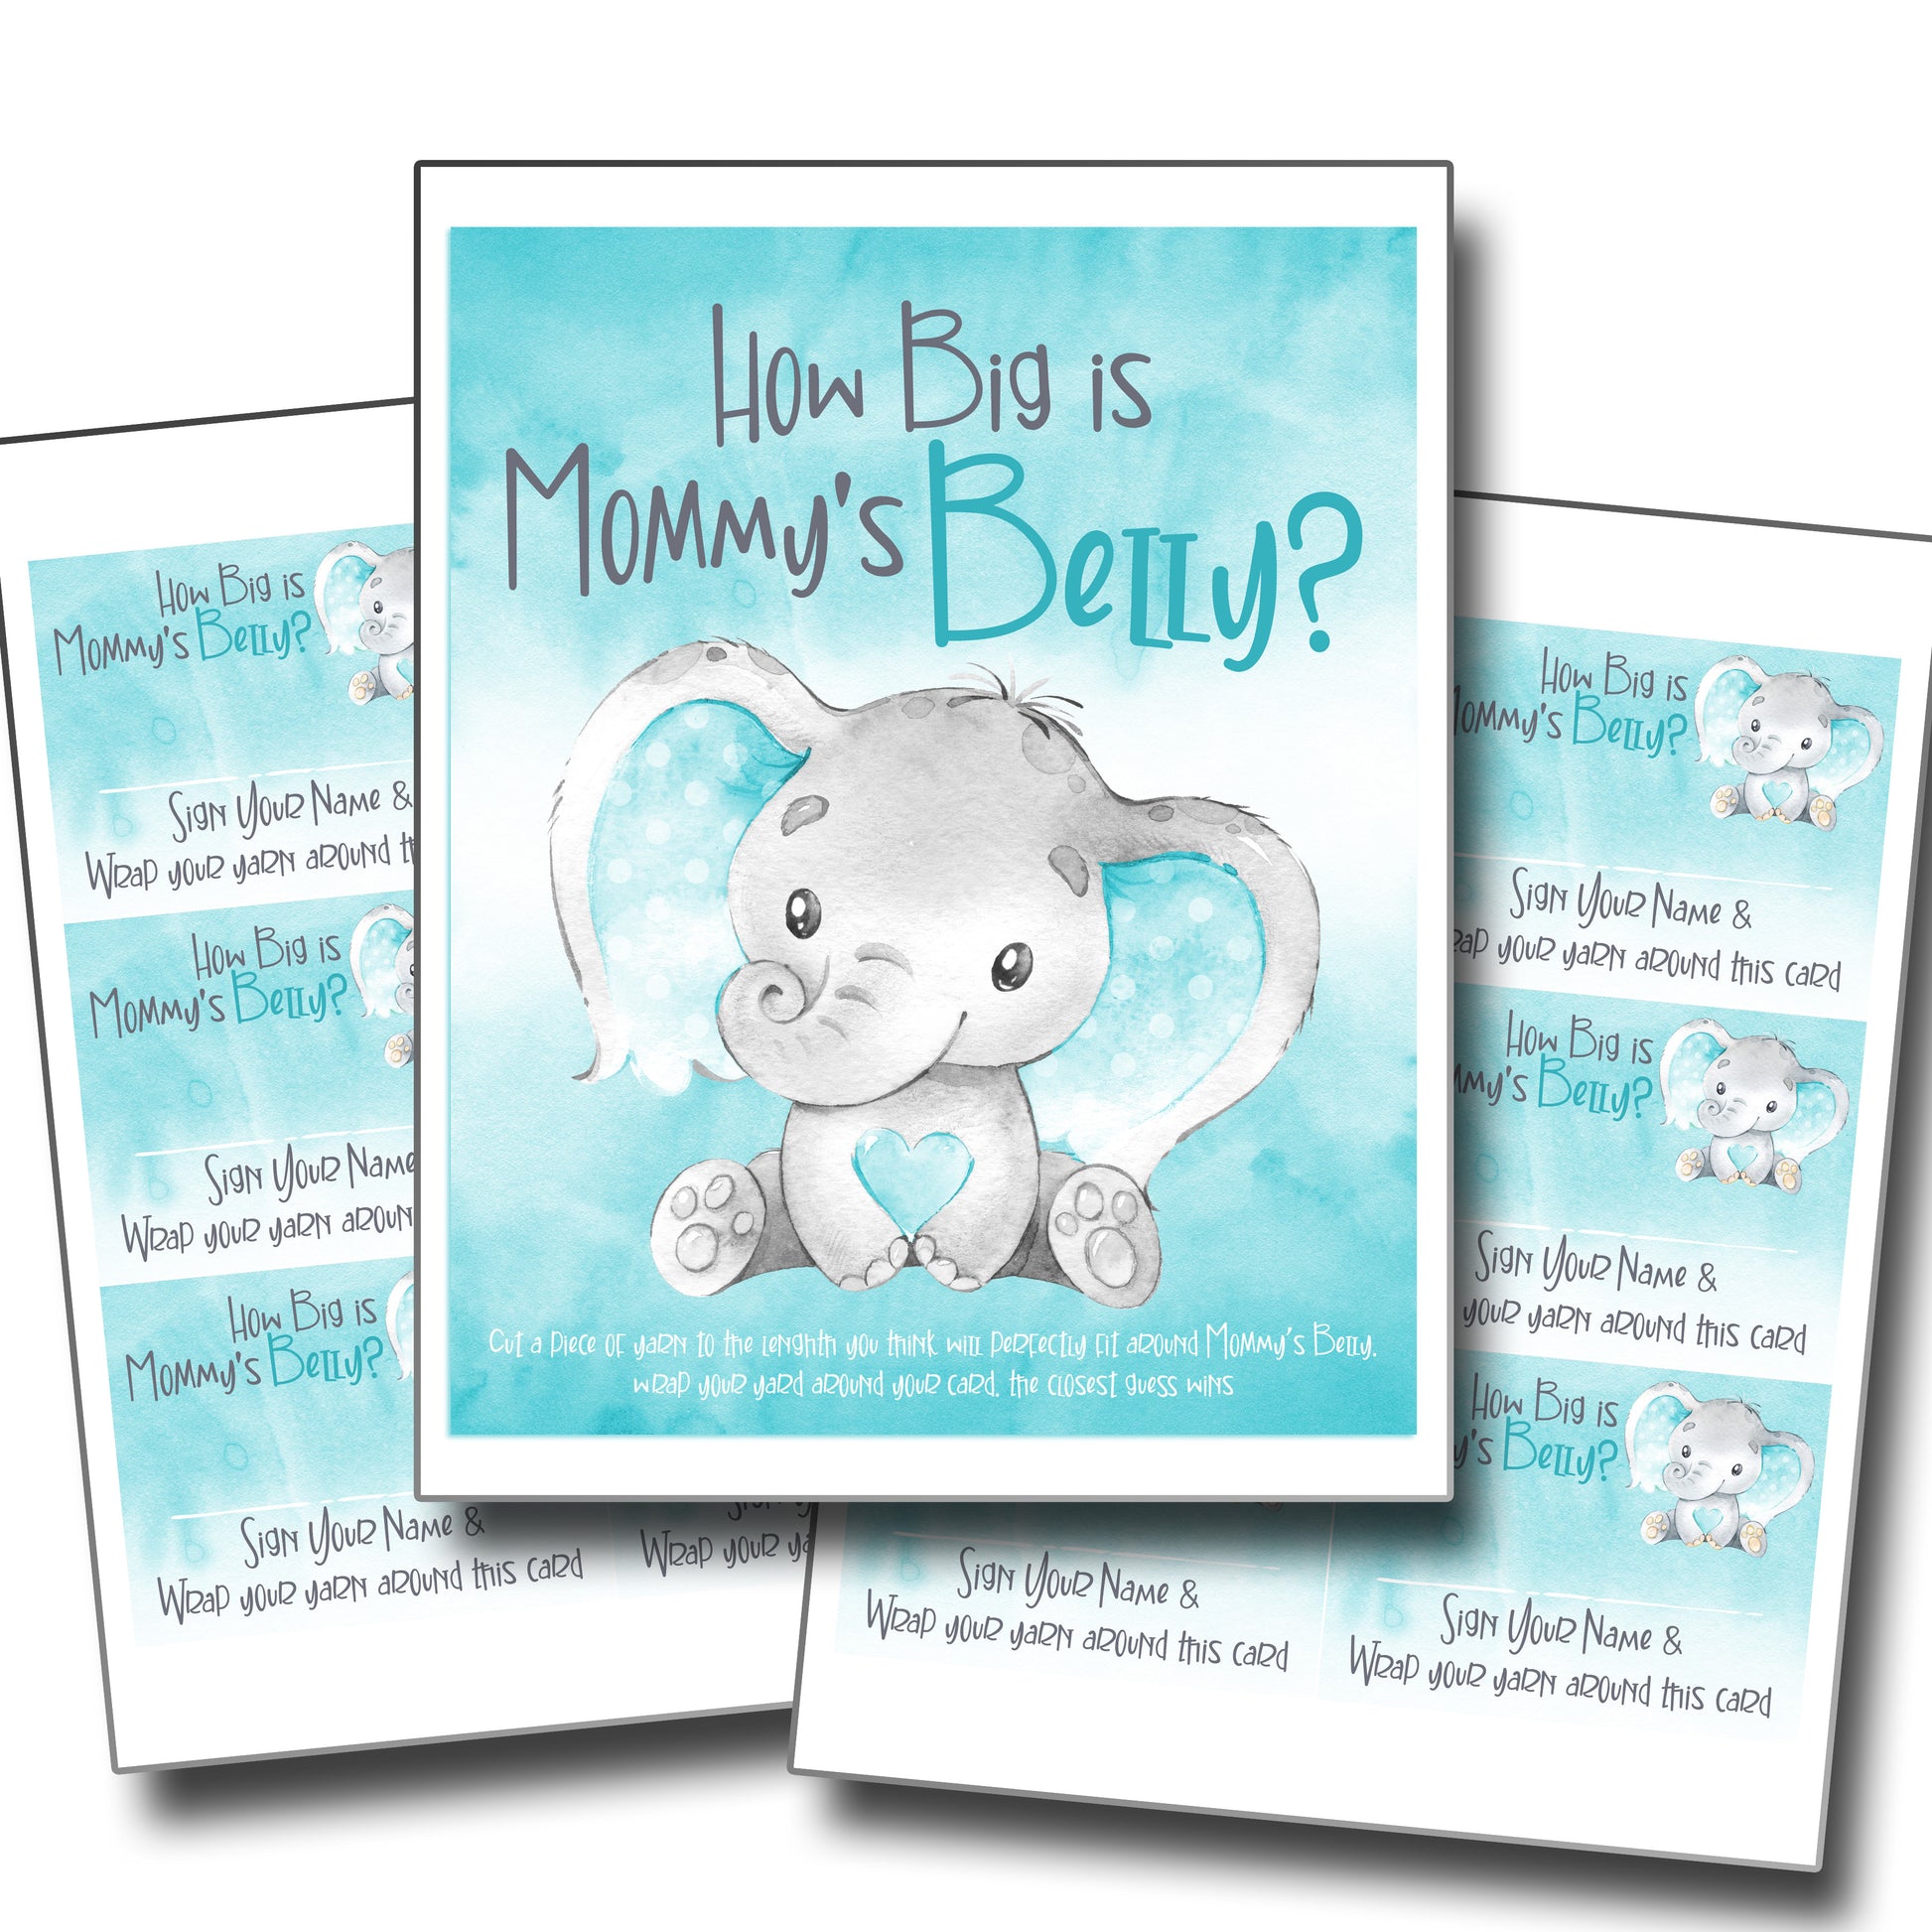 9117 - How Big is Mommy's Belly? Game - 30 People - Blue - EZscrapbooks Scrapbook Layouts Baby / Bridal Shower